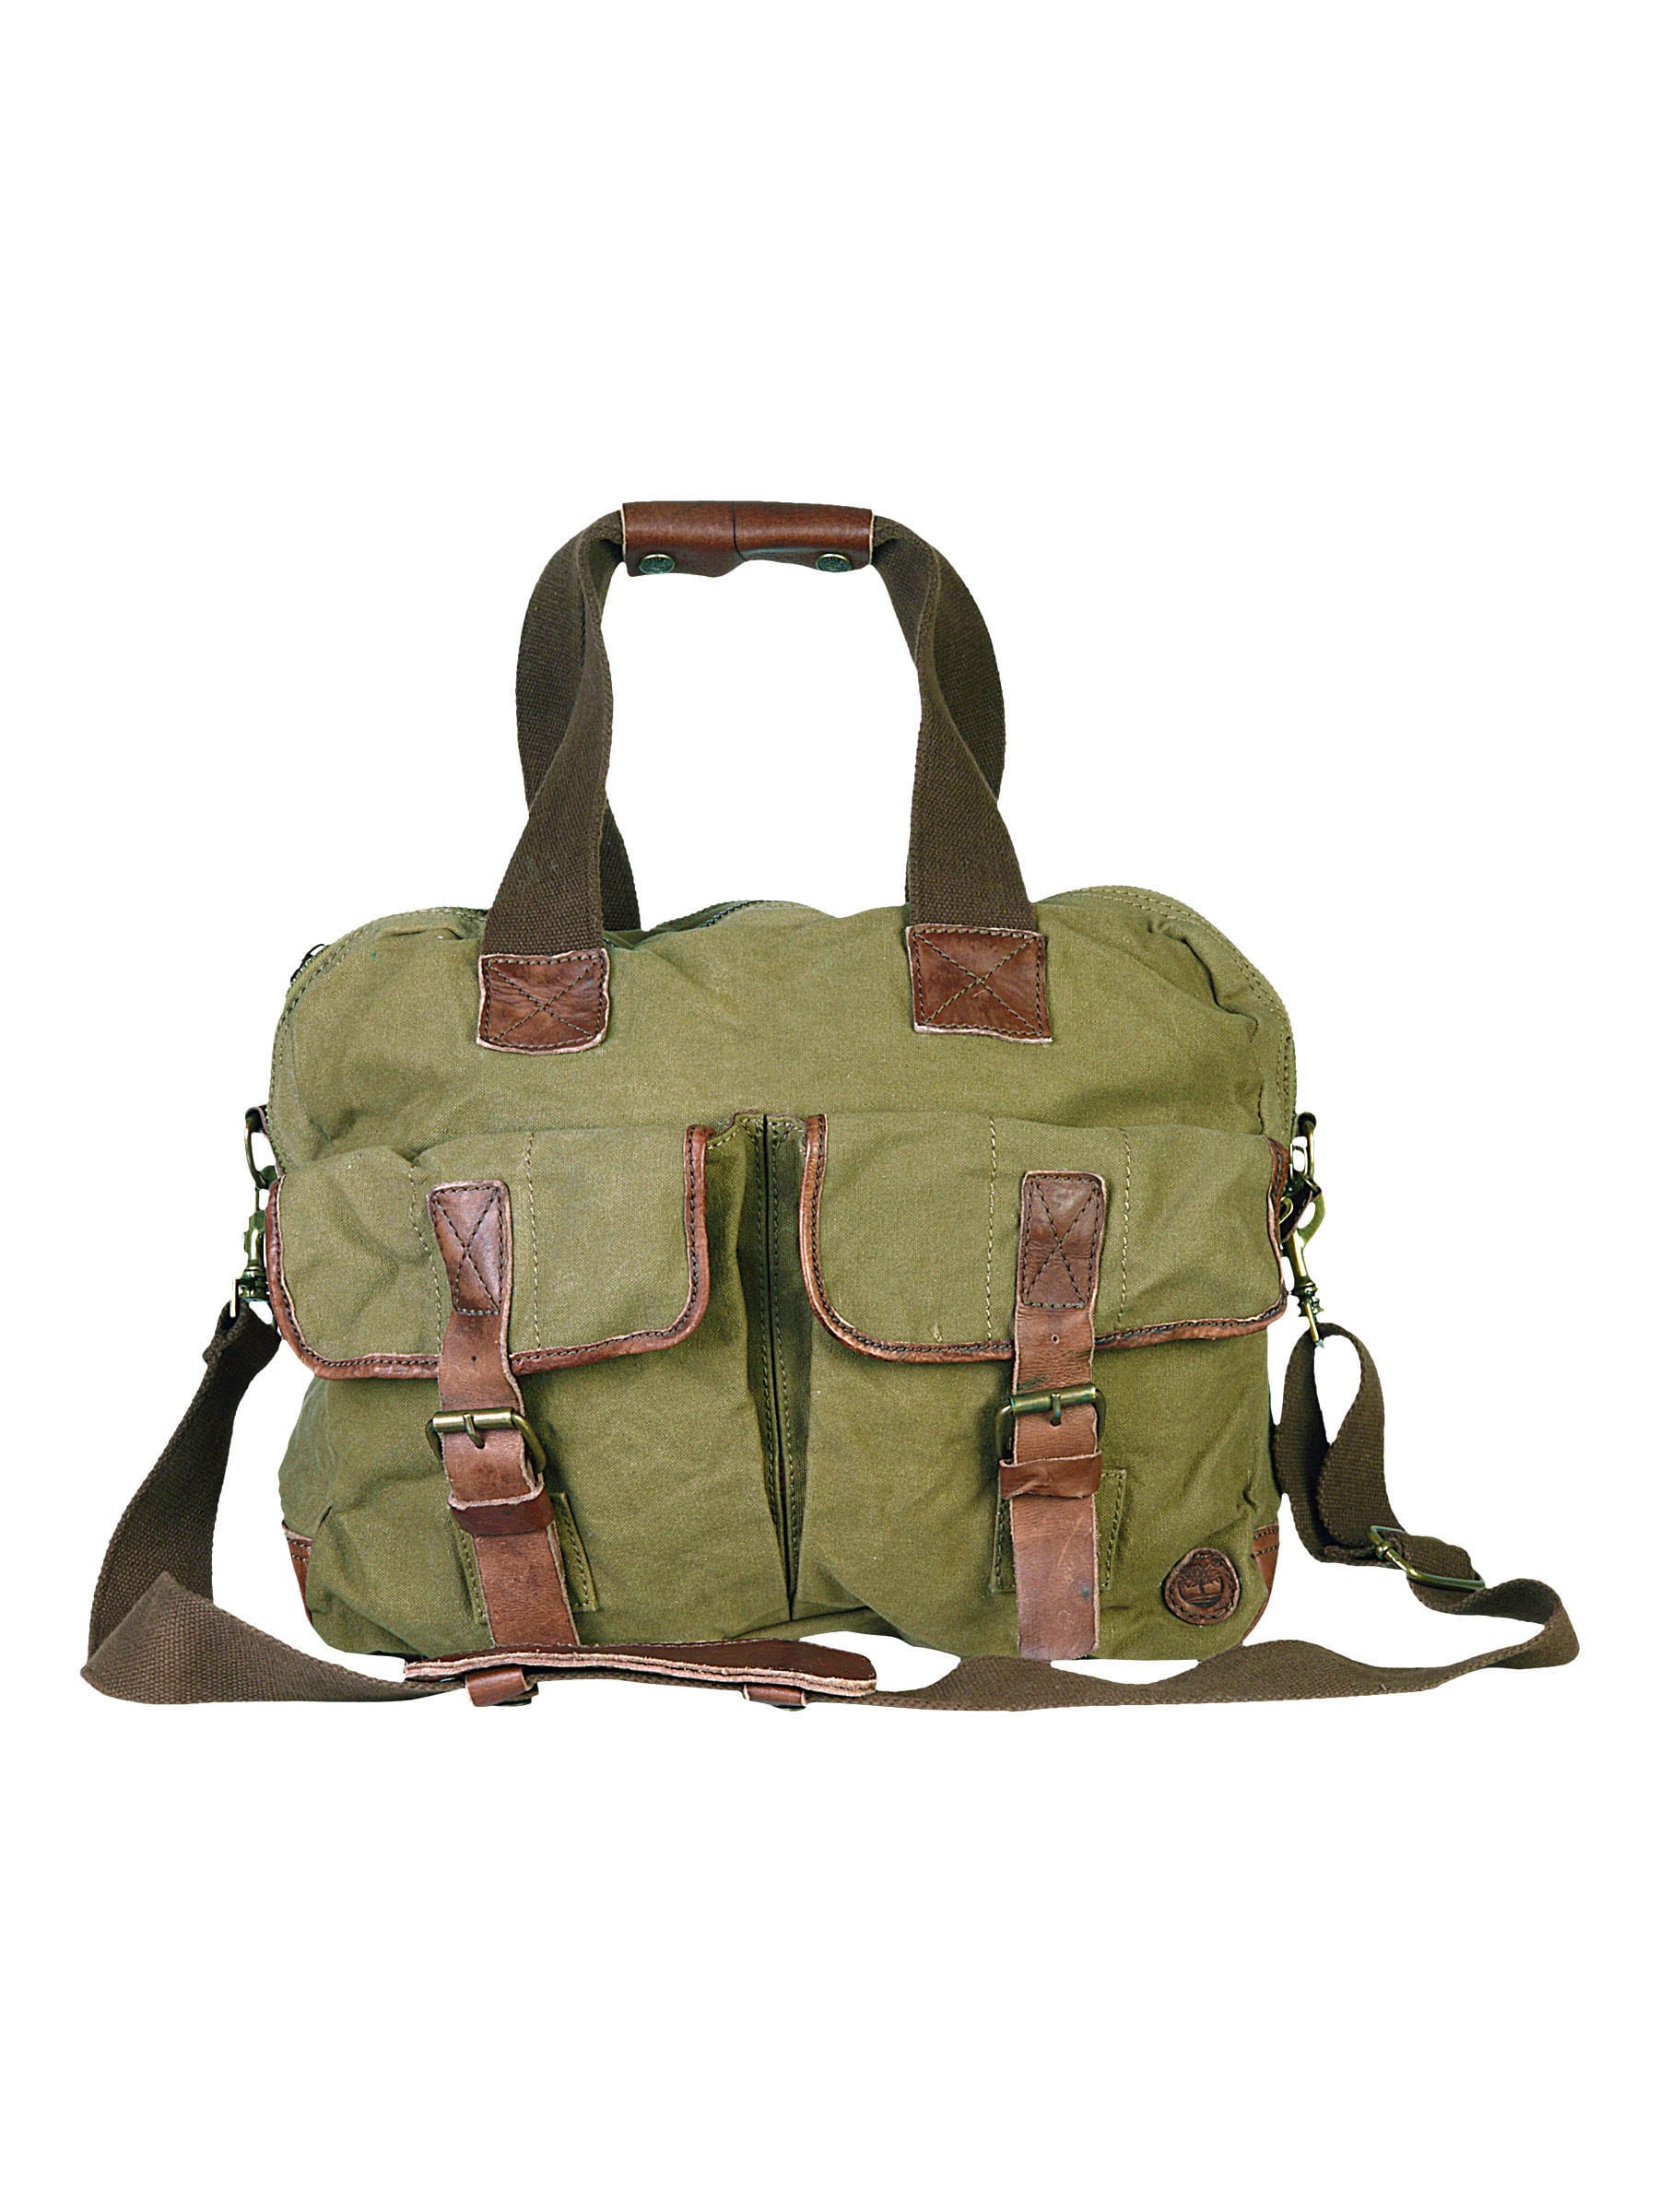 Timberland Unisex Solid Olive Bags